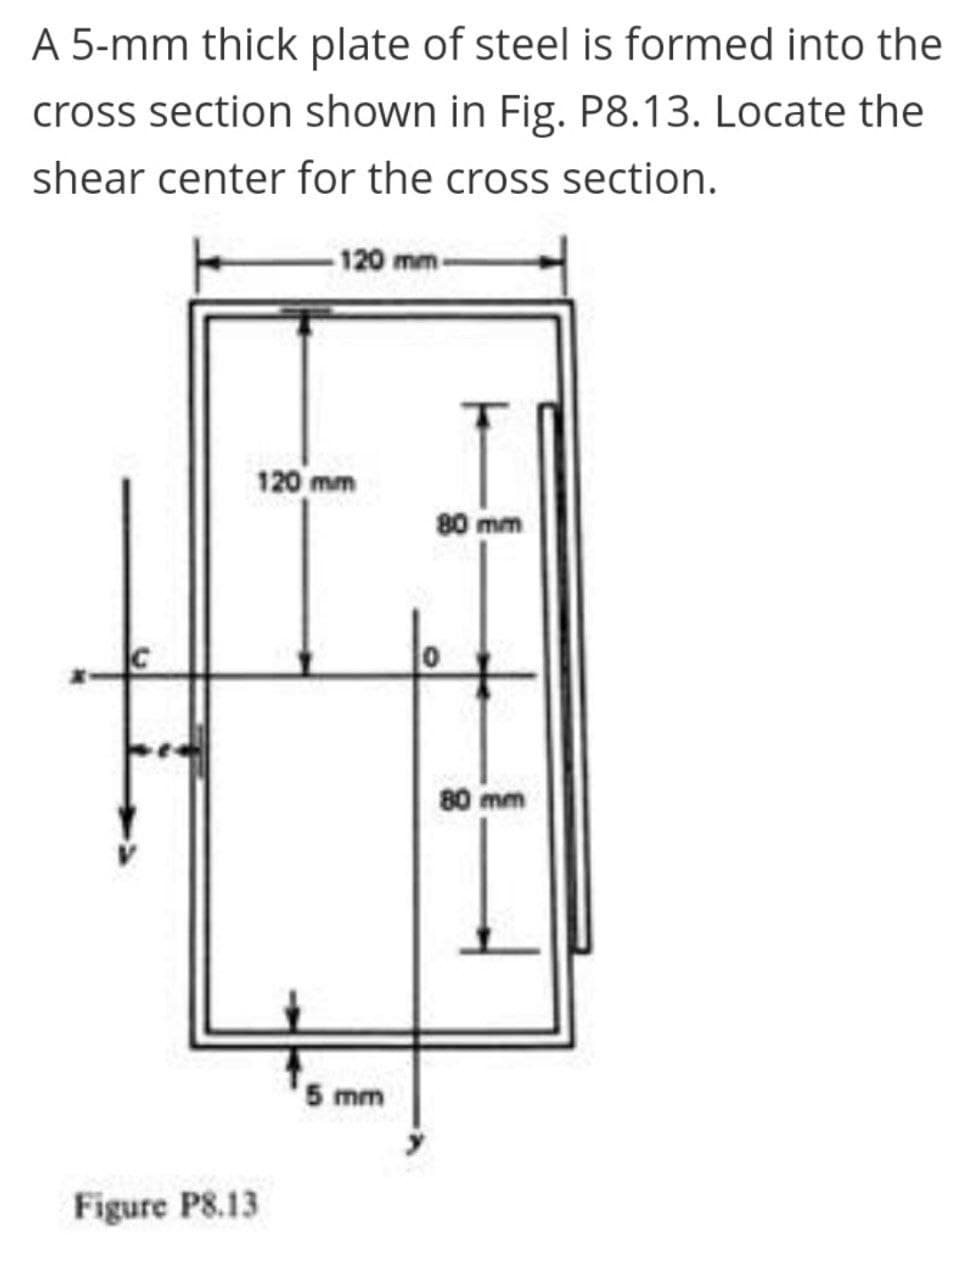 A 5-mm thick plate of steel is formed into the
cross section shown in Fig. P8.13. Locate the
shear center for the cross section.
-120 mm-
120 mm
80 mm
80 mm
5 mm
Figure P8.13
